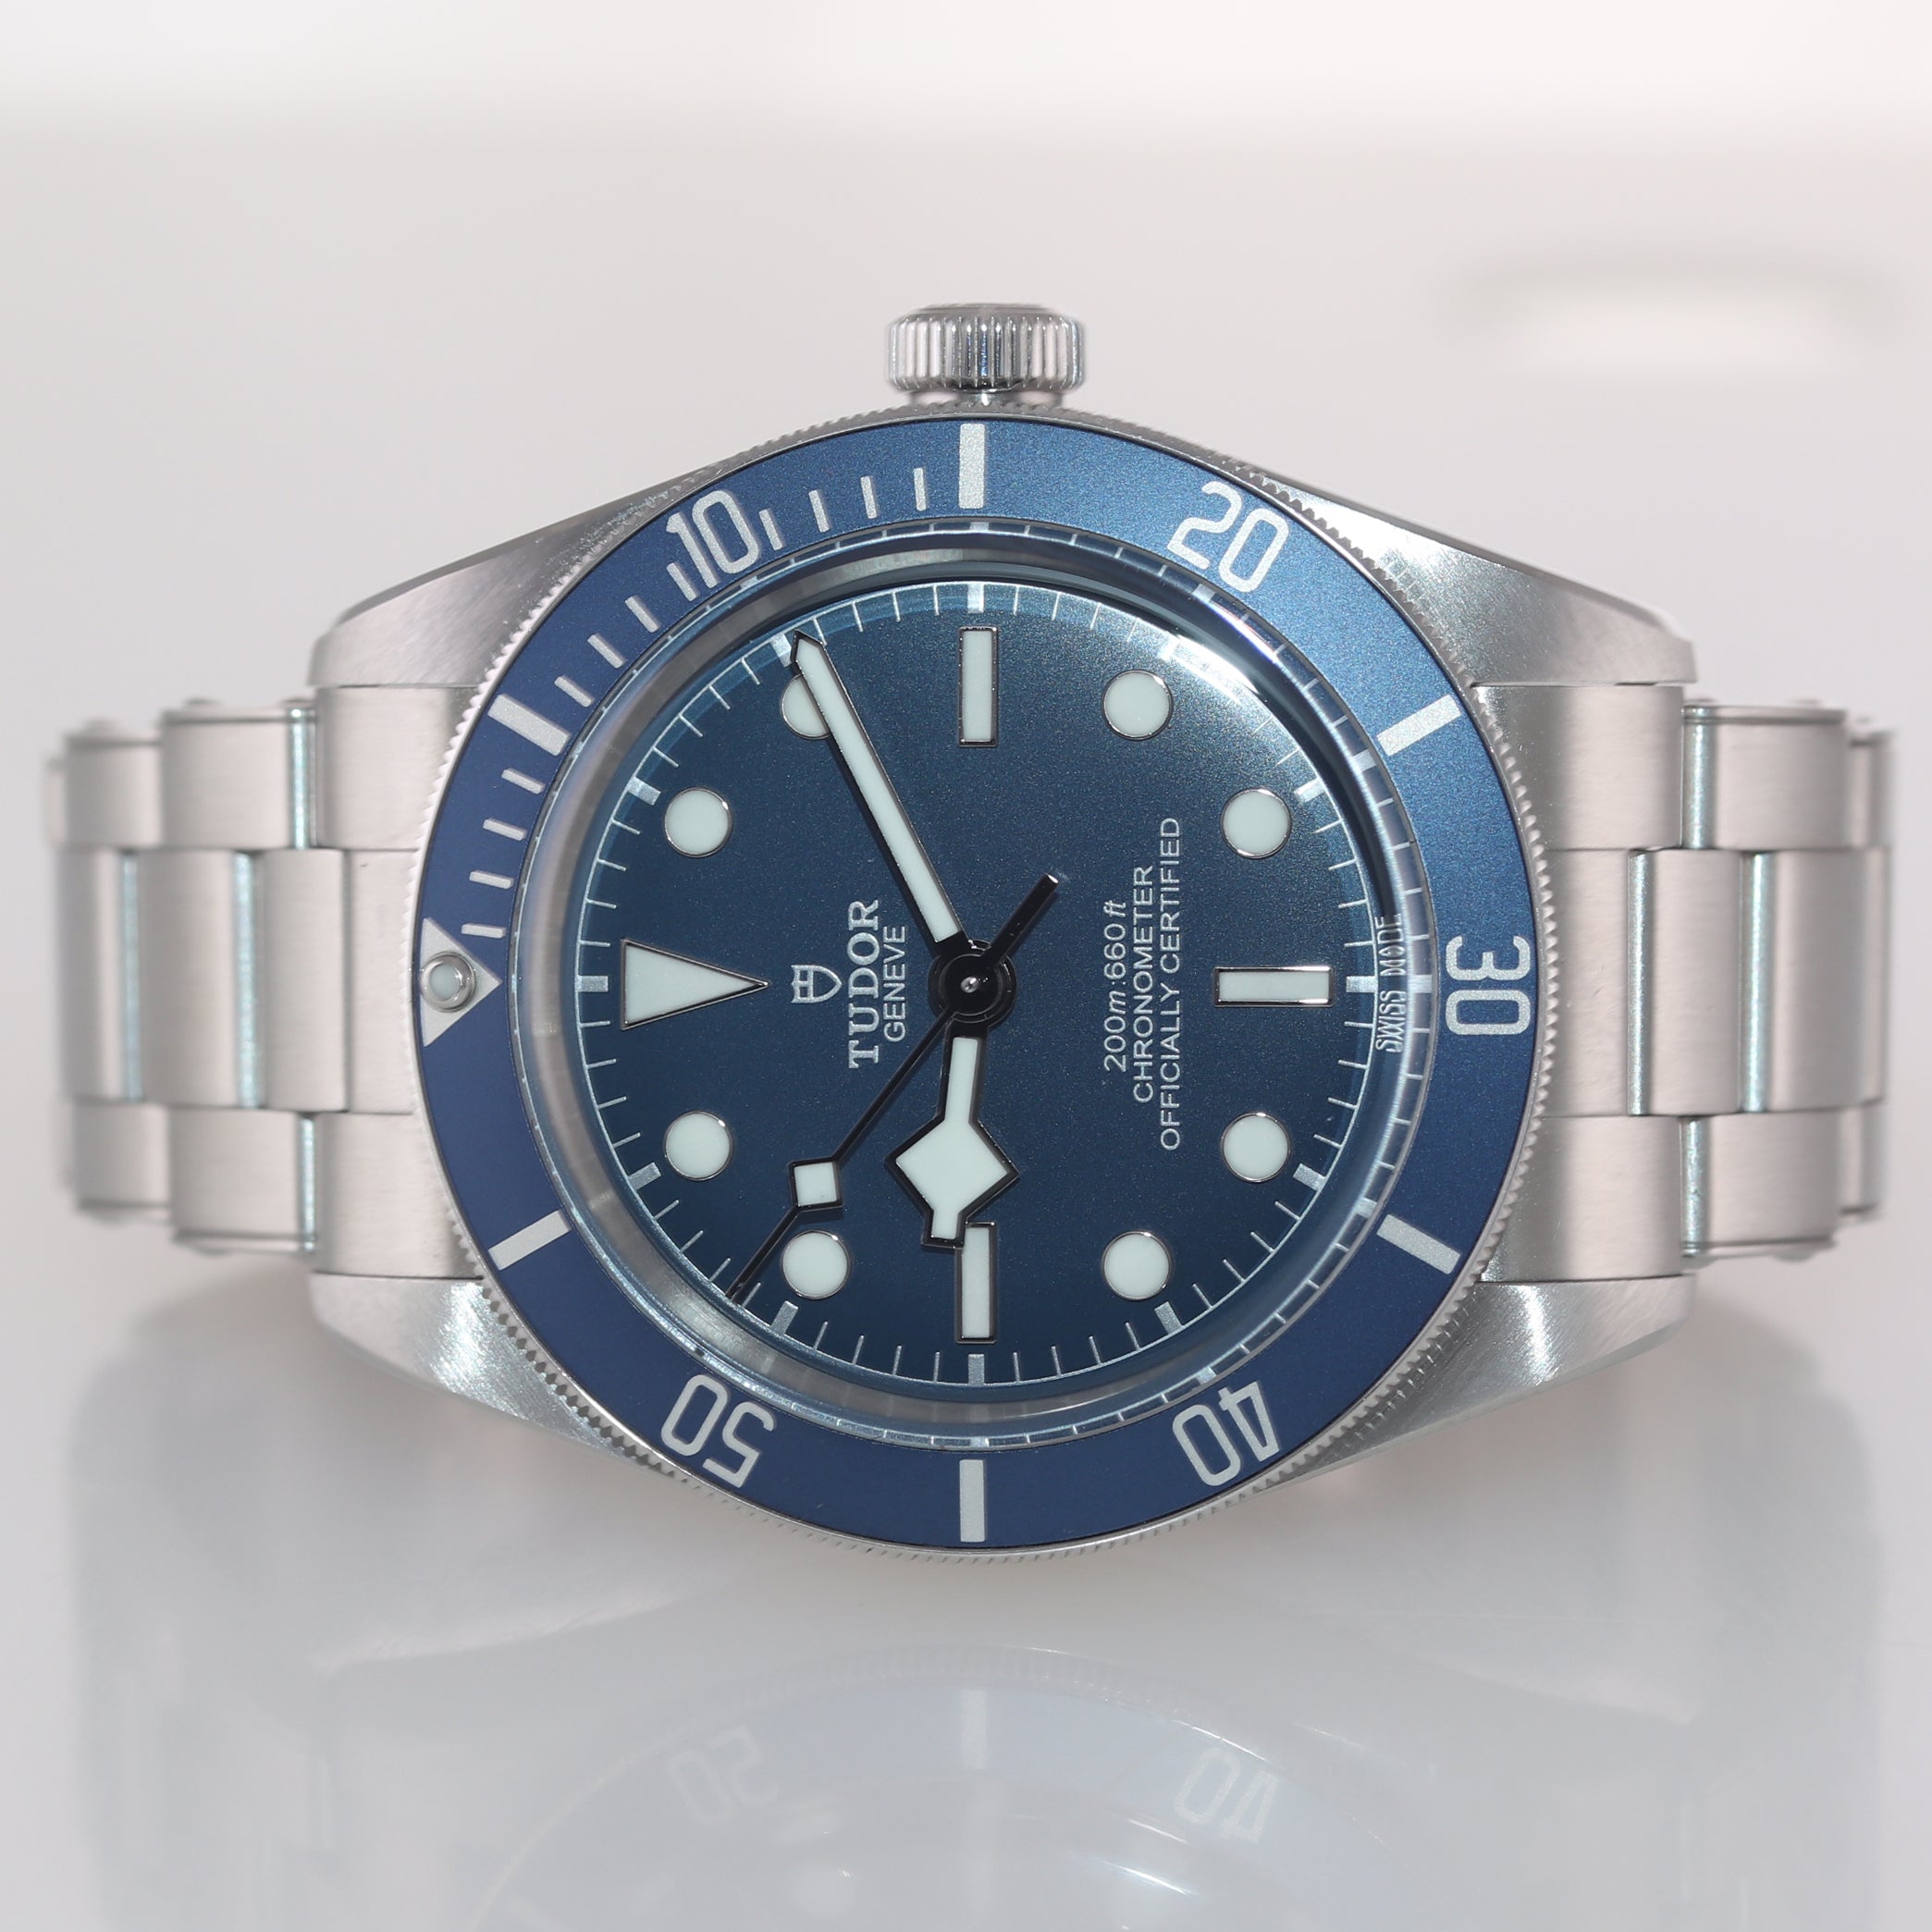 Copy of PAPERS Tudor Black Bay Fifty Eight 58 BLUE Stainless Steel Watch 79030B